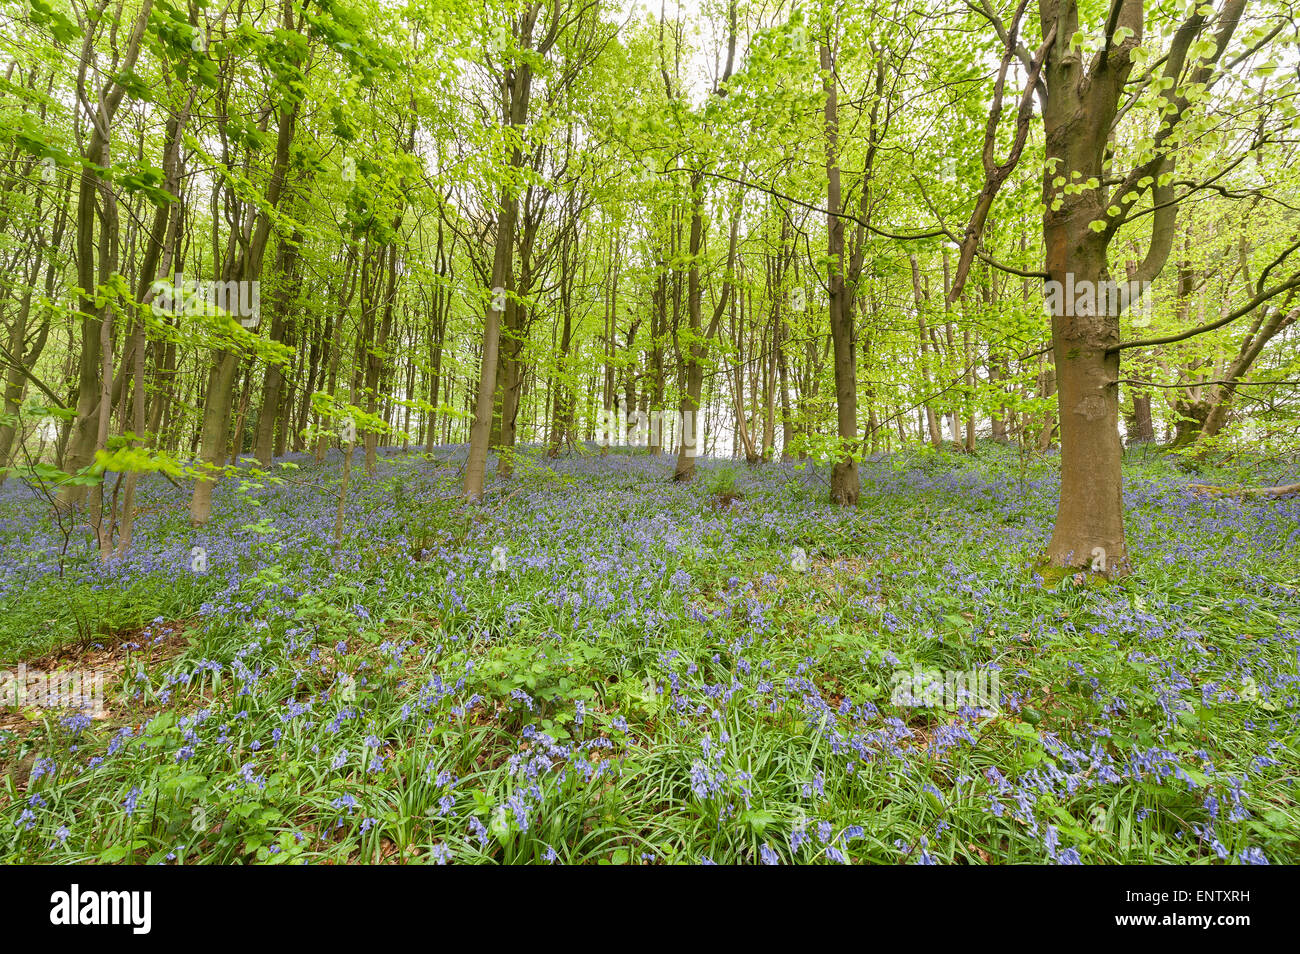 lots of wild bluebells flowers in springtime meadow under deciduous sweet chestnut  tree leaf canopy open woodland clearing Stock Photo